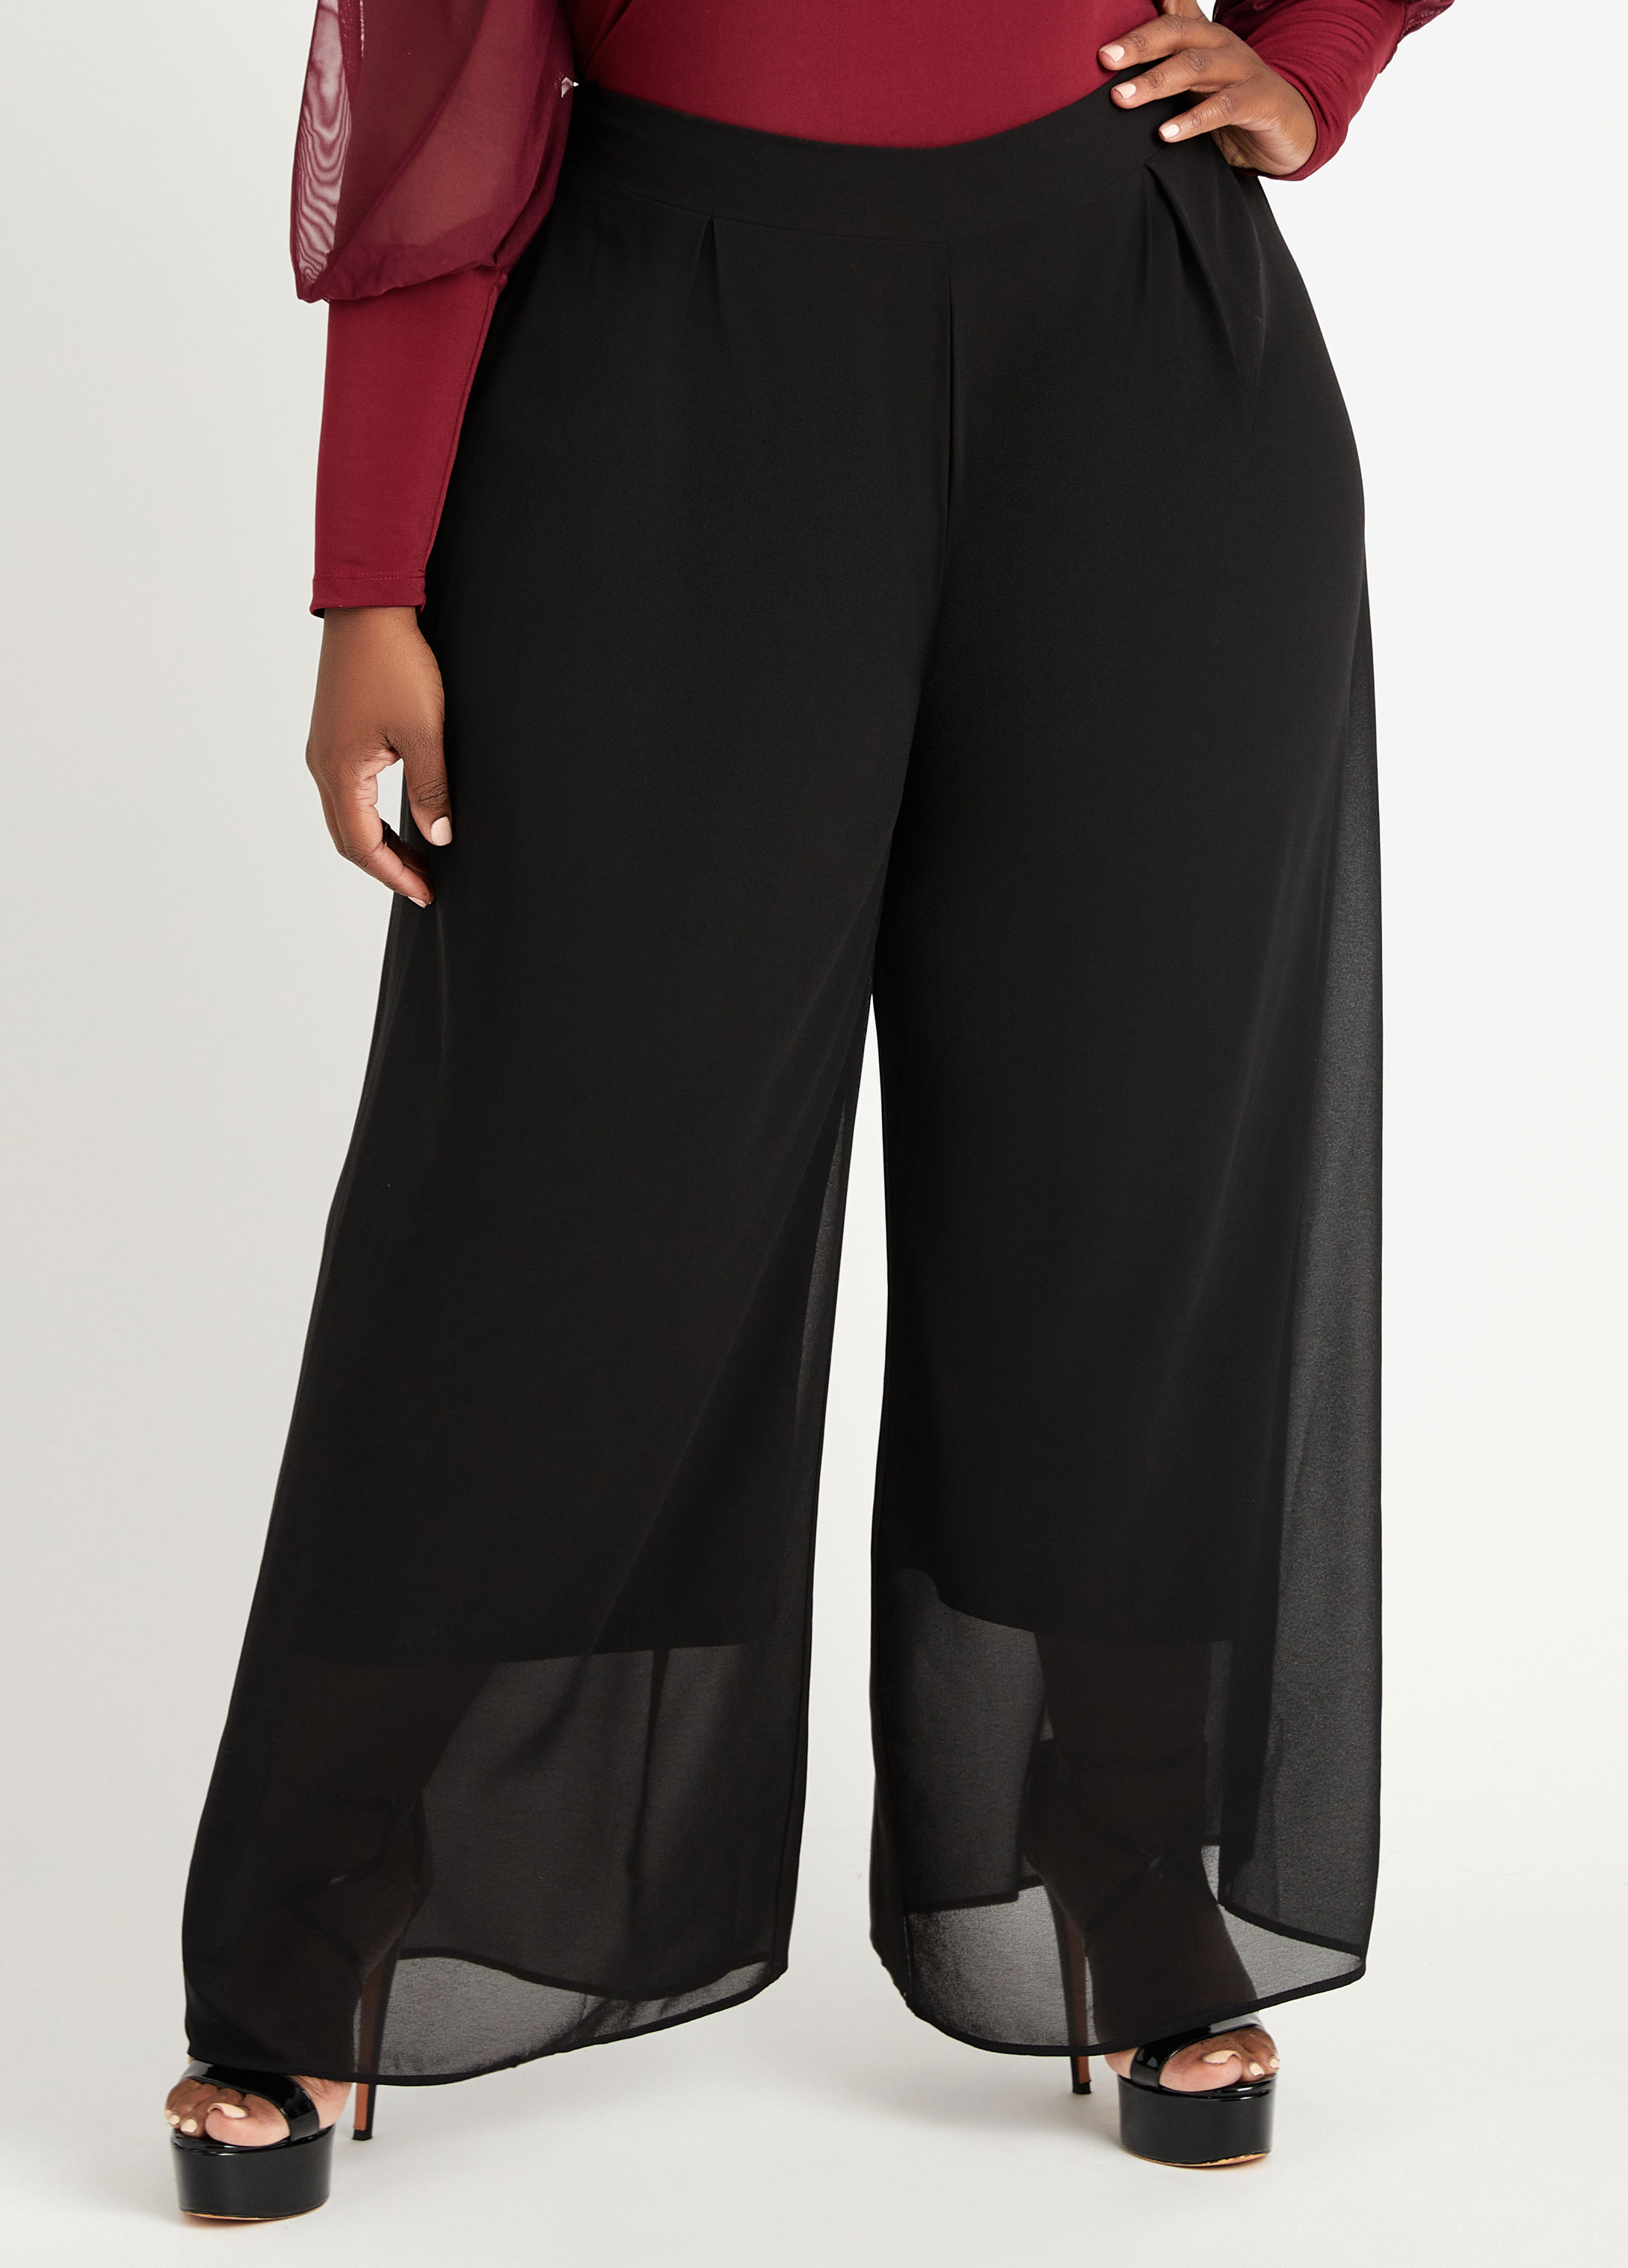 Plus Size Trousers Pull On Wide Leg High Waist Woven Stretch Pant